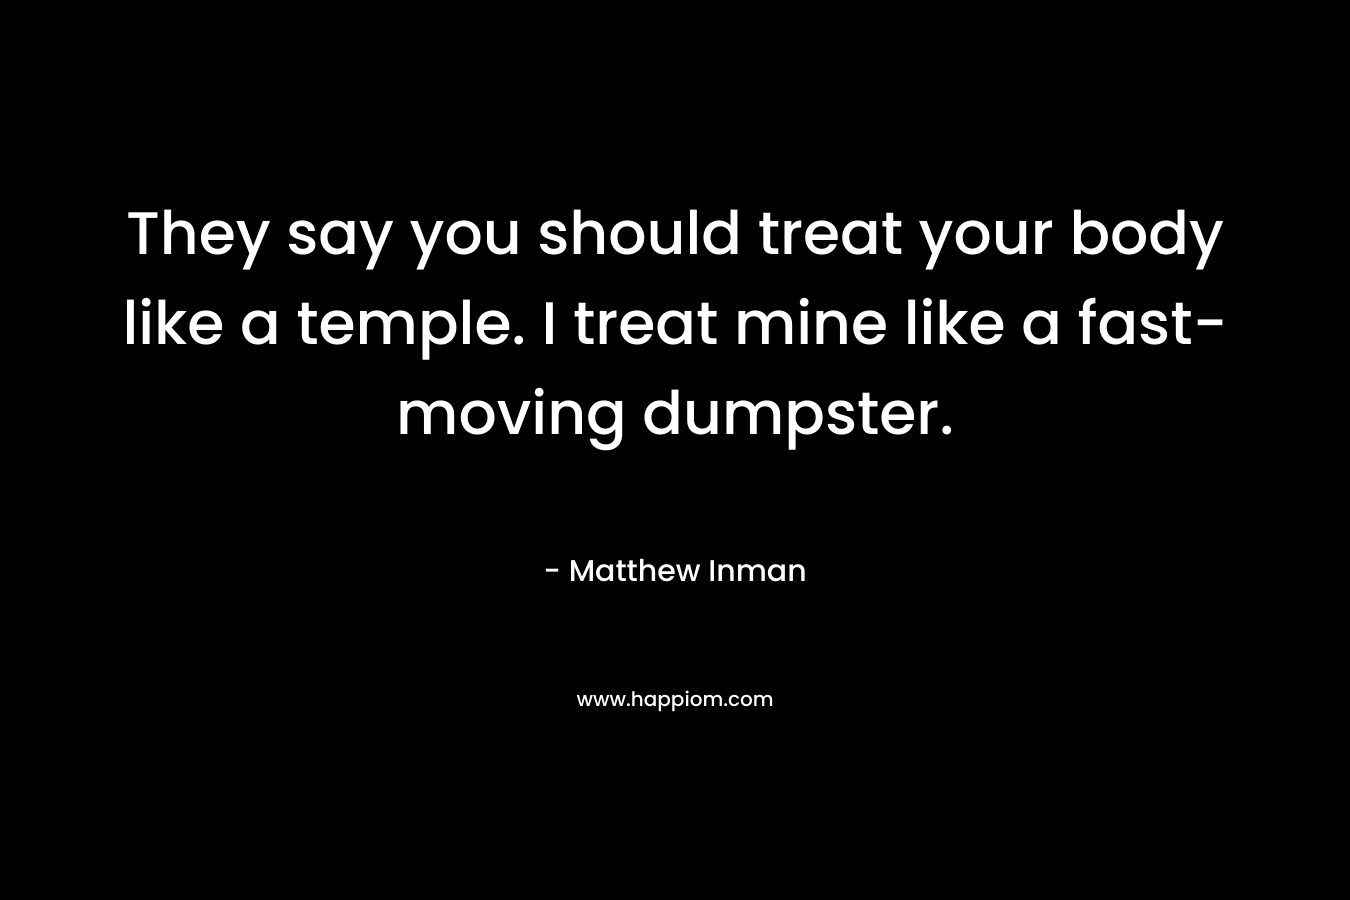 They say you should treat your body like a temple. I treat mine like a fast-moving dumpster.